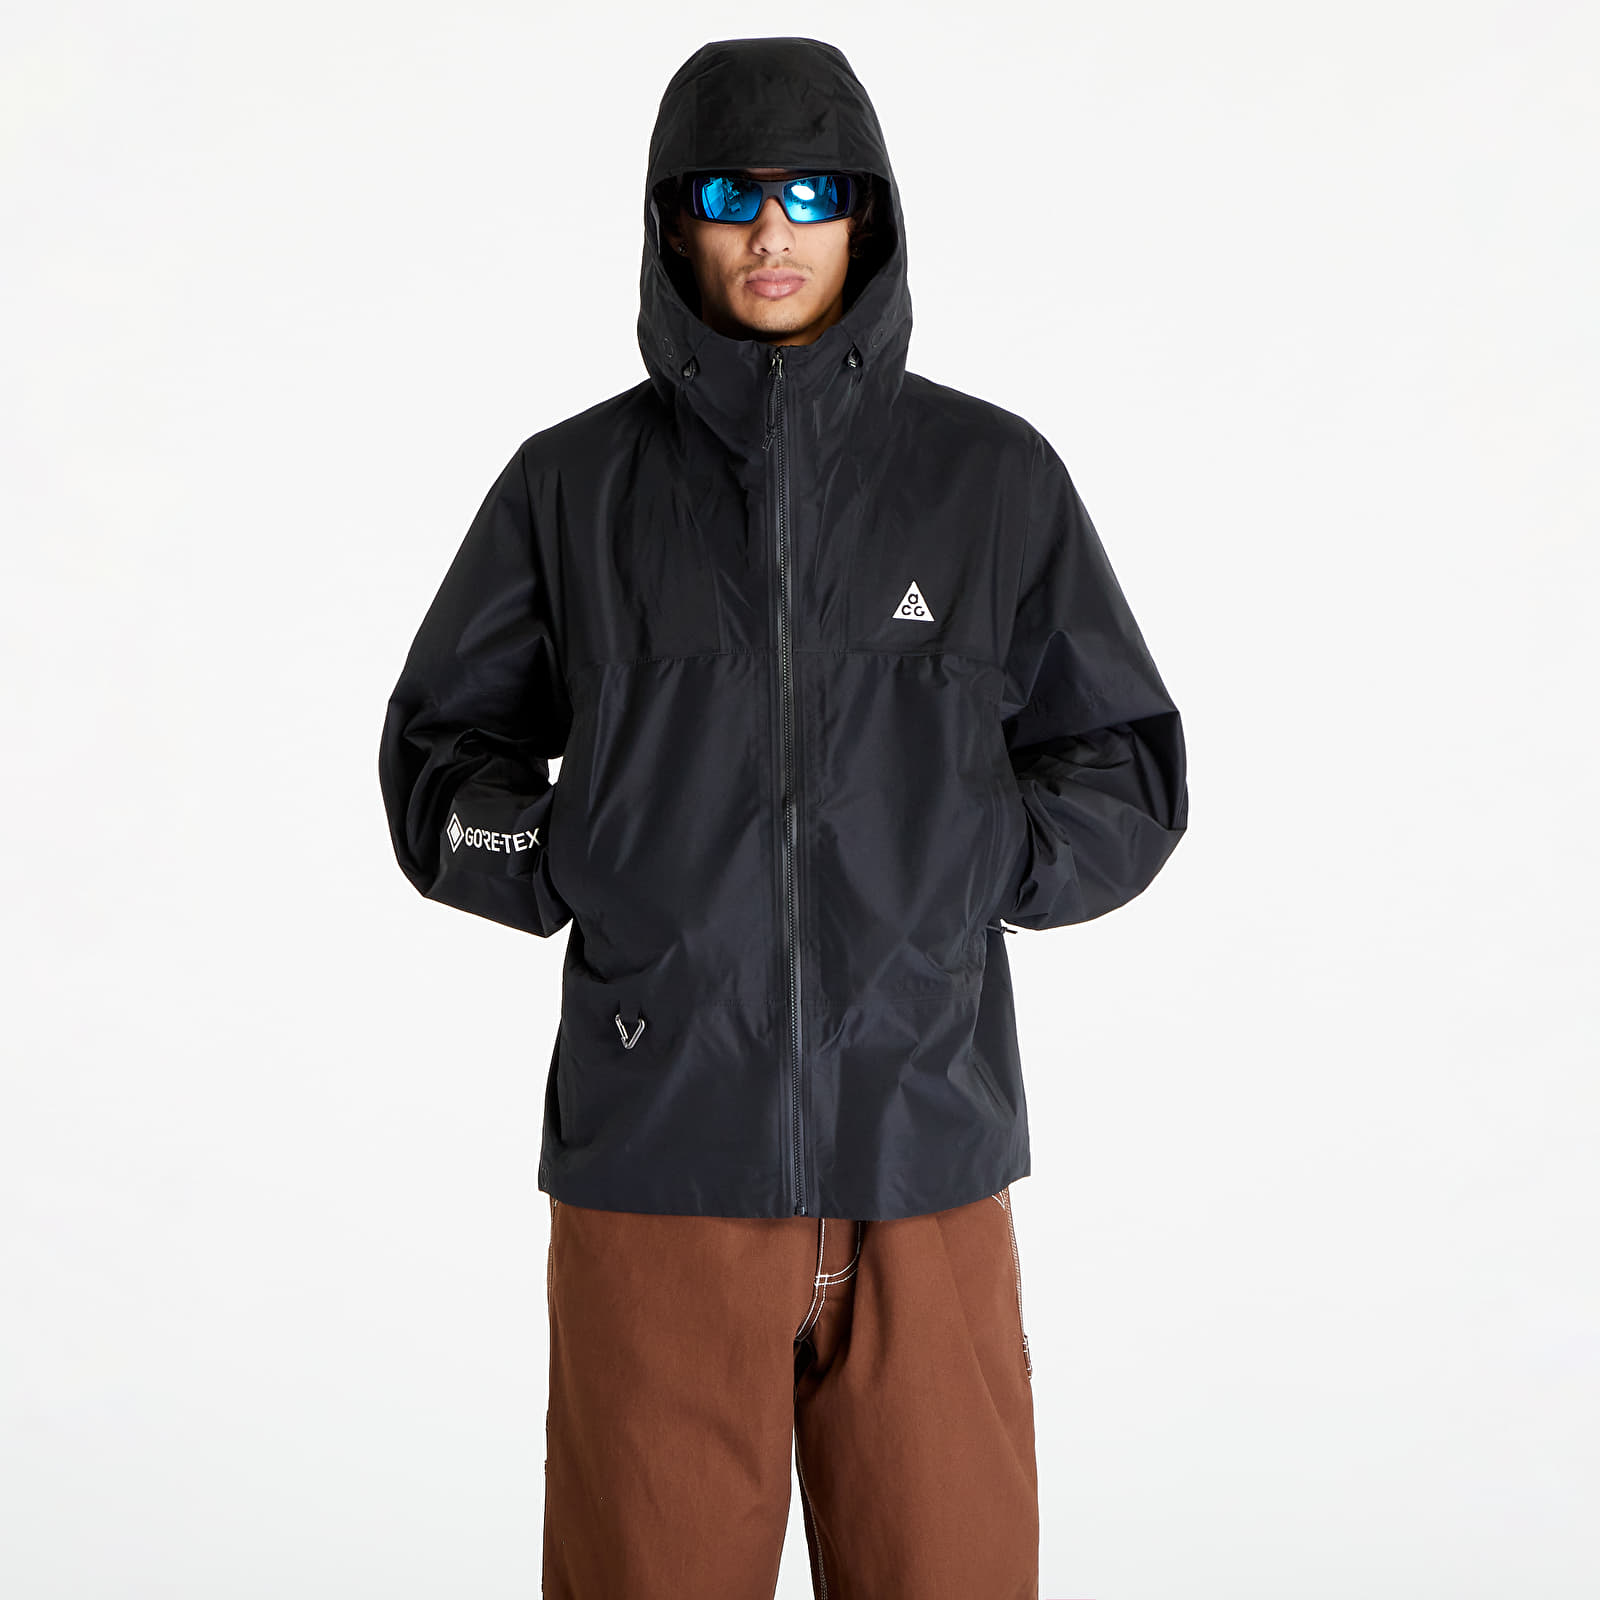 Vestes Nike Storm-FIT ADV ACG "Chain of Craters" Jacket Black/ Summit White